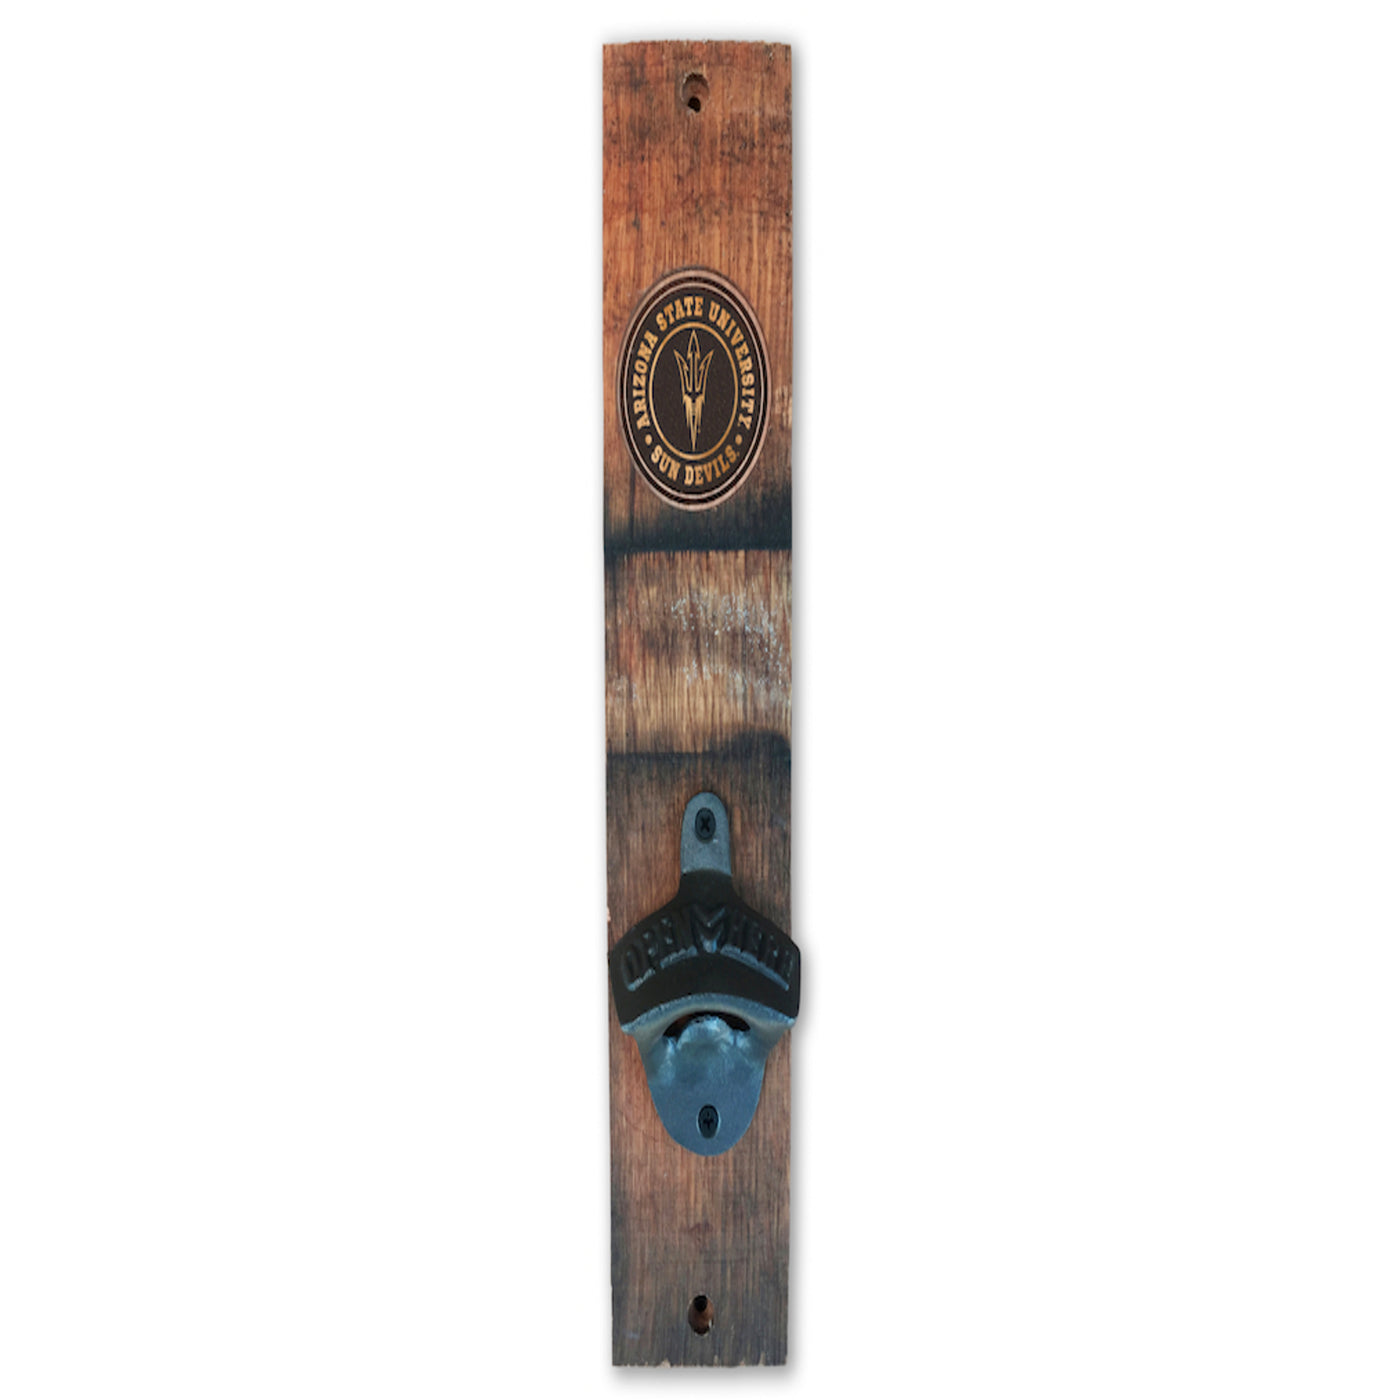 ASU wood fork wall mount with Pitchfork design at the top and bottle opener near the base